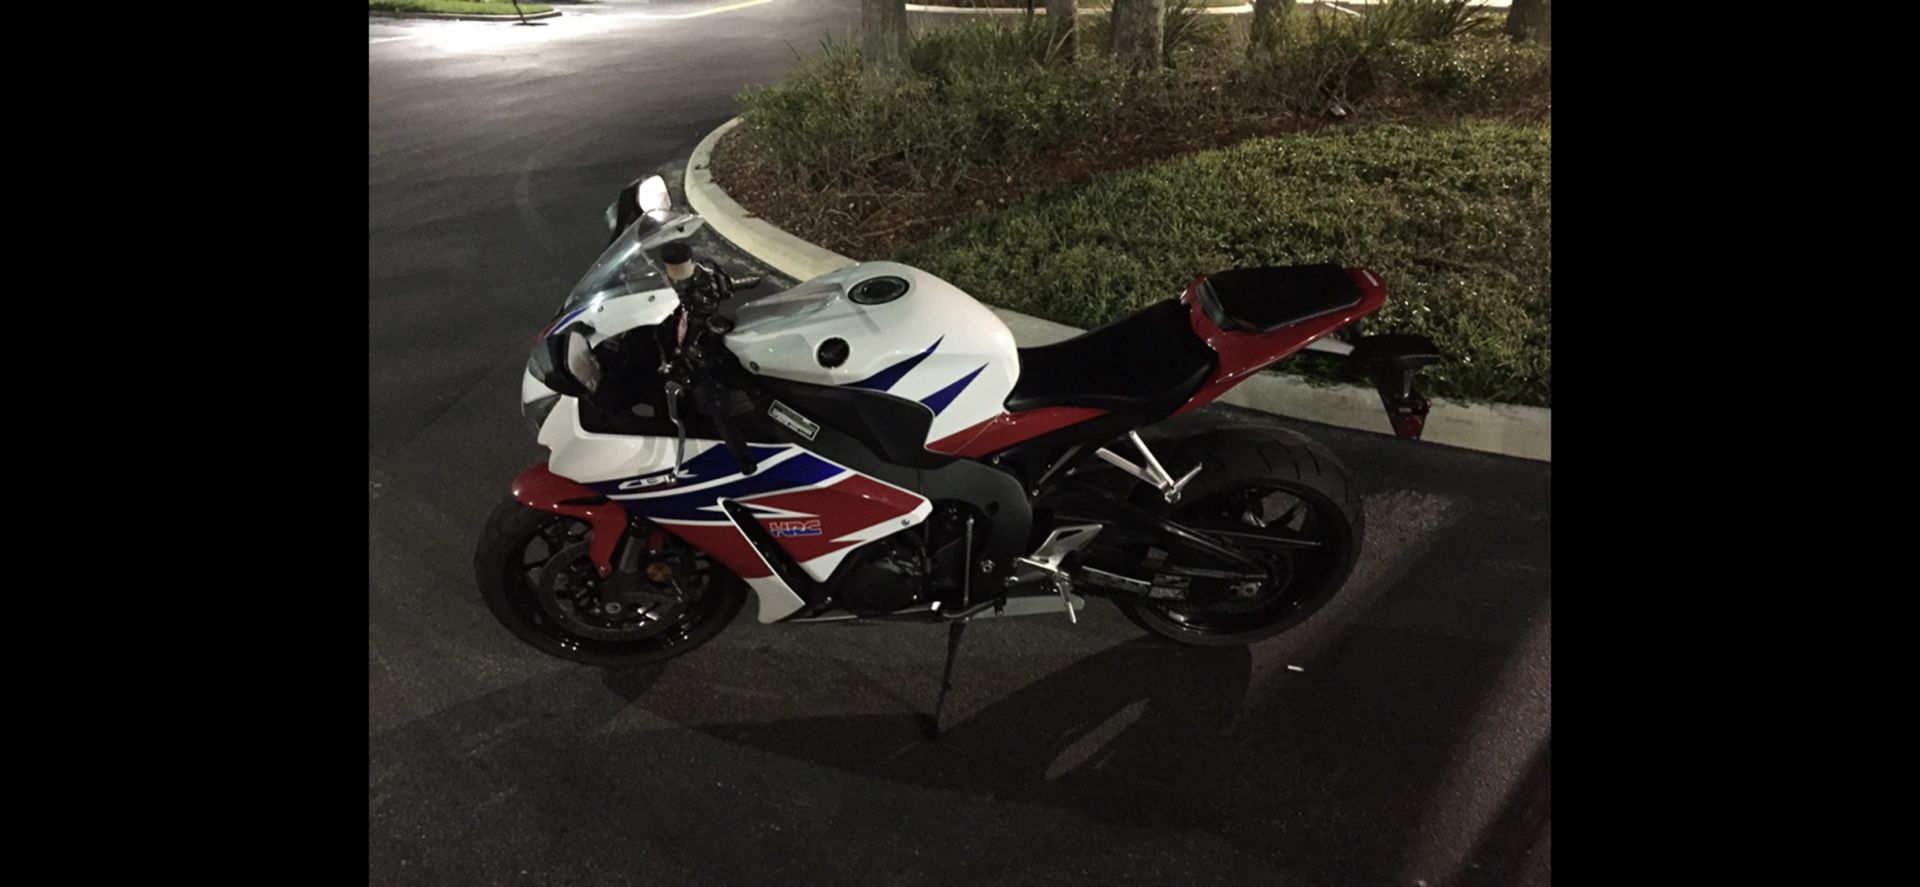 Motorcycle Honda CBR 1000rr HRC series limited edition